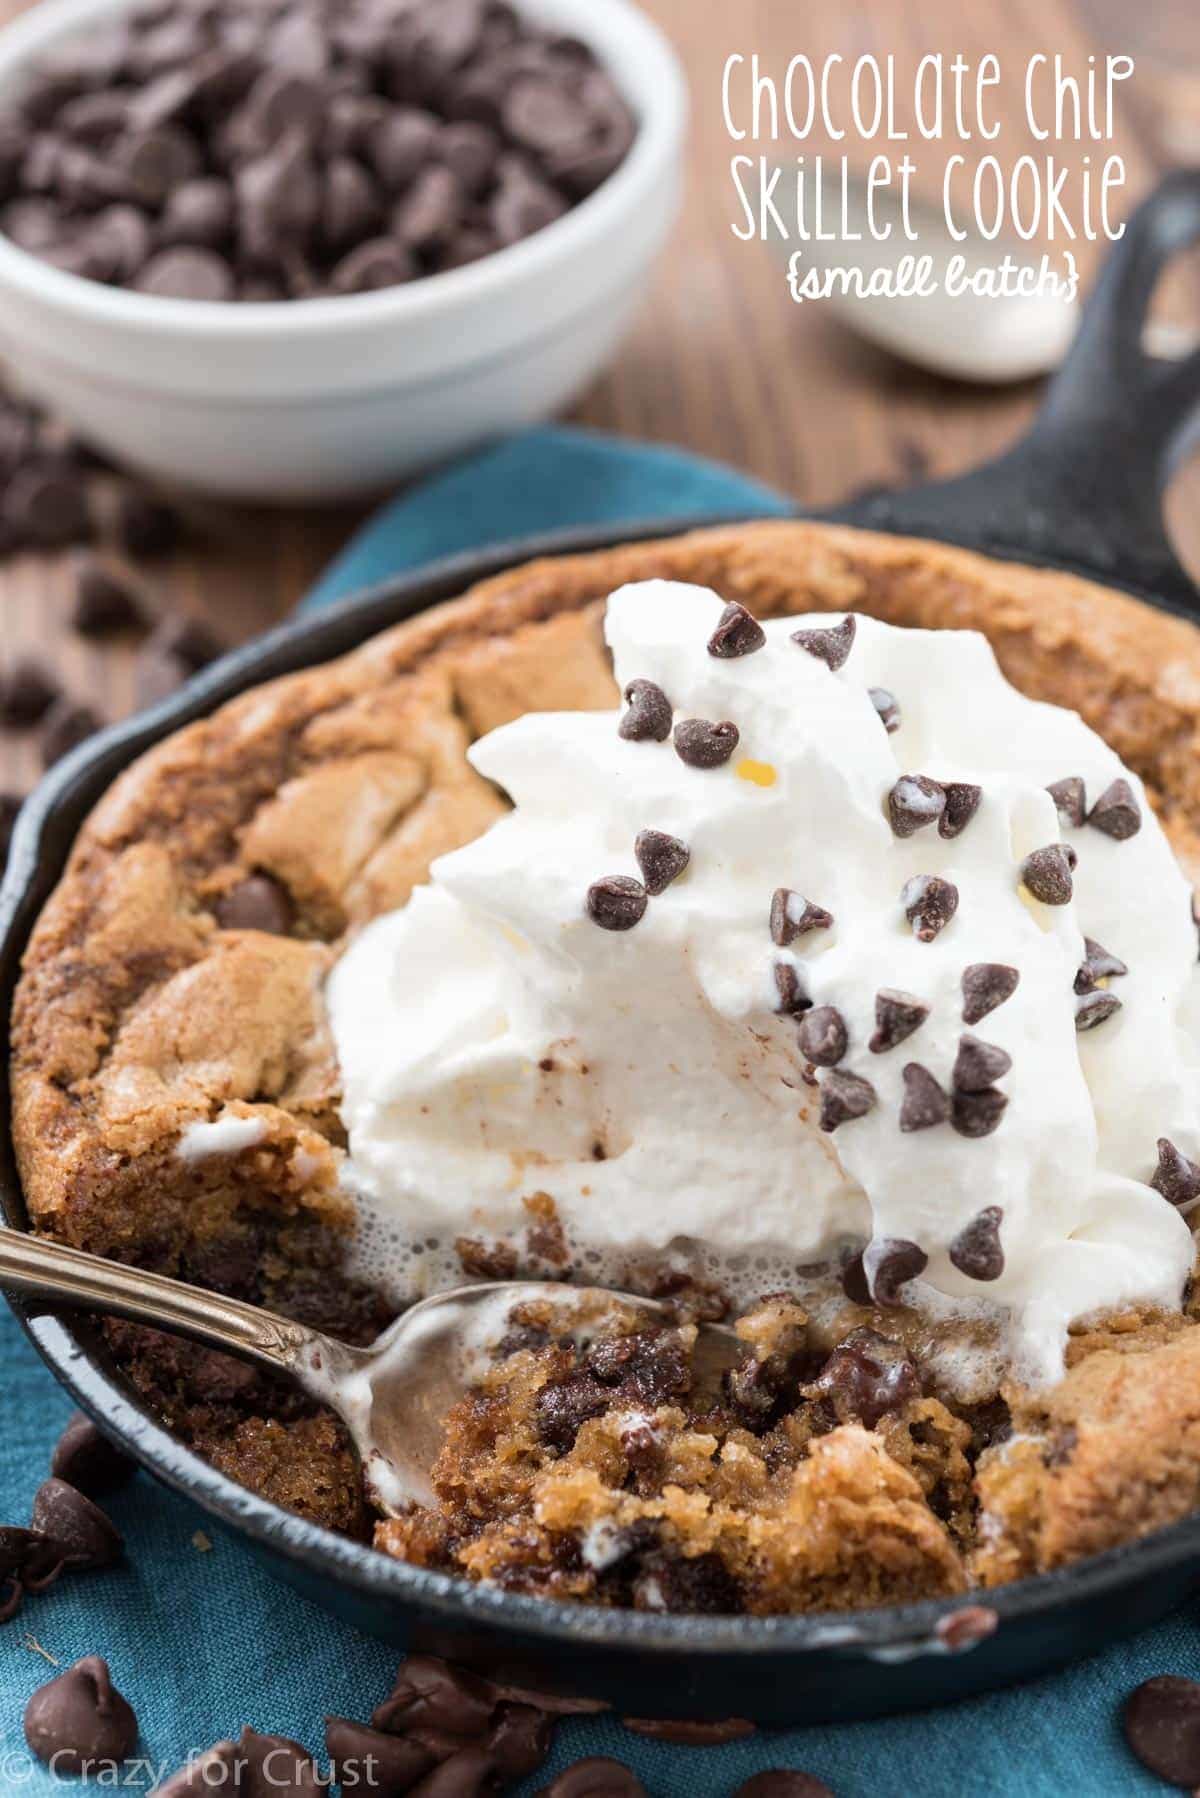 Chocolate Chip Skillet Cookie for two